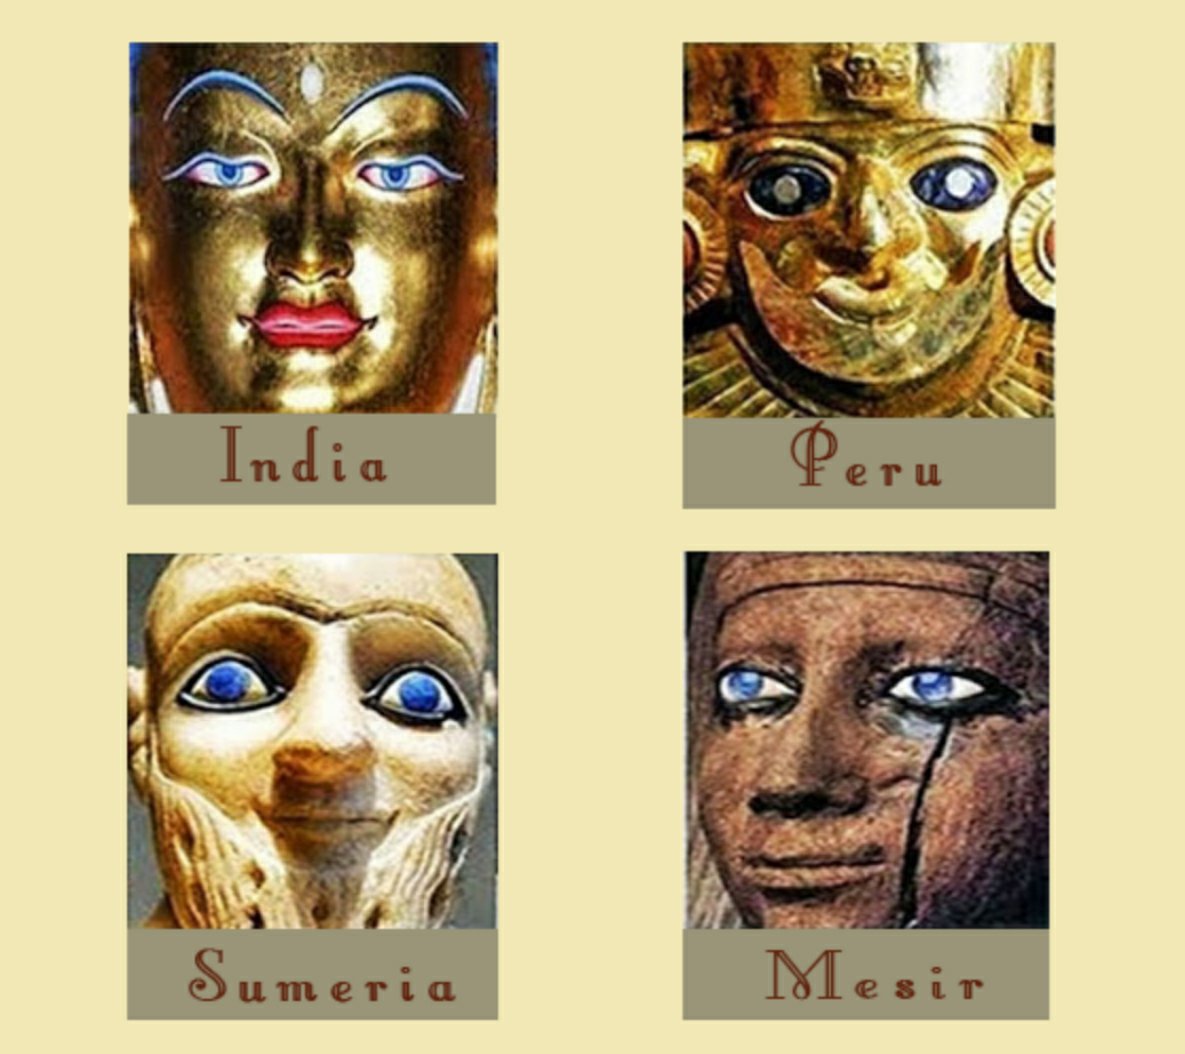 Many ancient civilizations depicted beings with blue eyes.